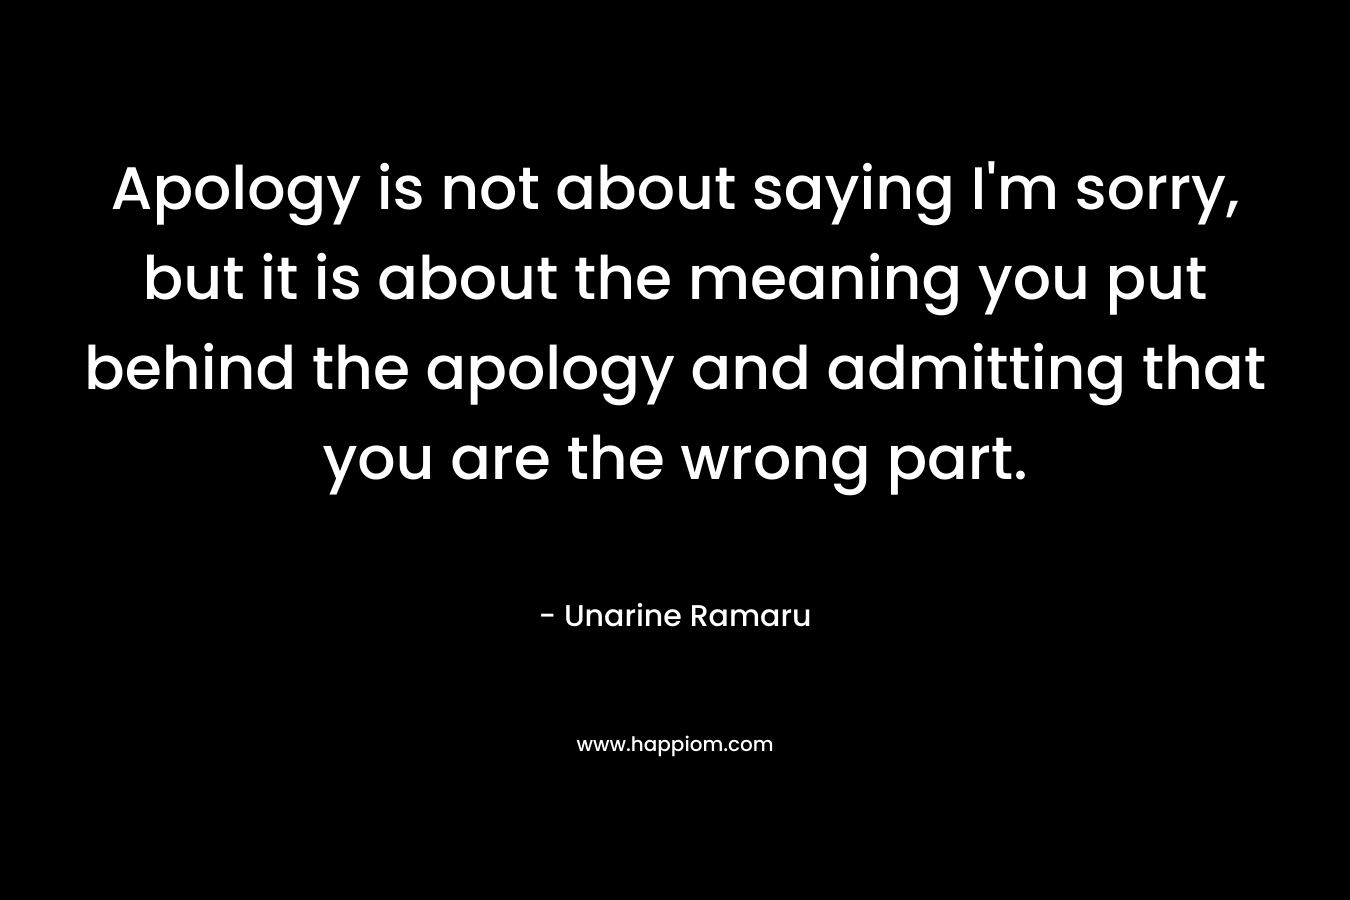 Apology is not about saying I'm sorry, but it is about the meaning you put behind the apology and admitting that you are the wrong part.